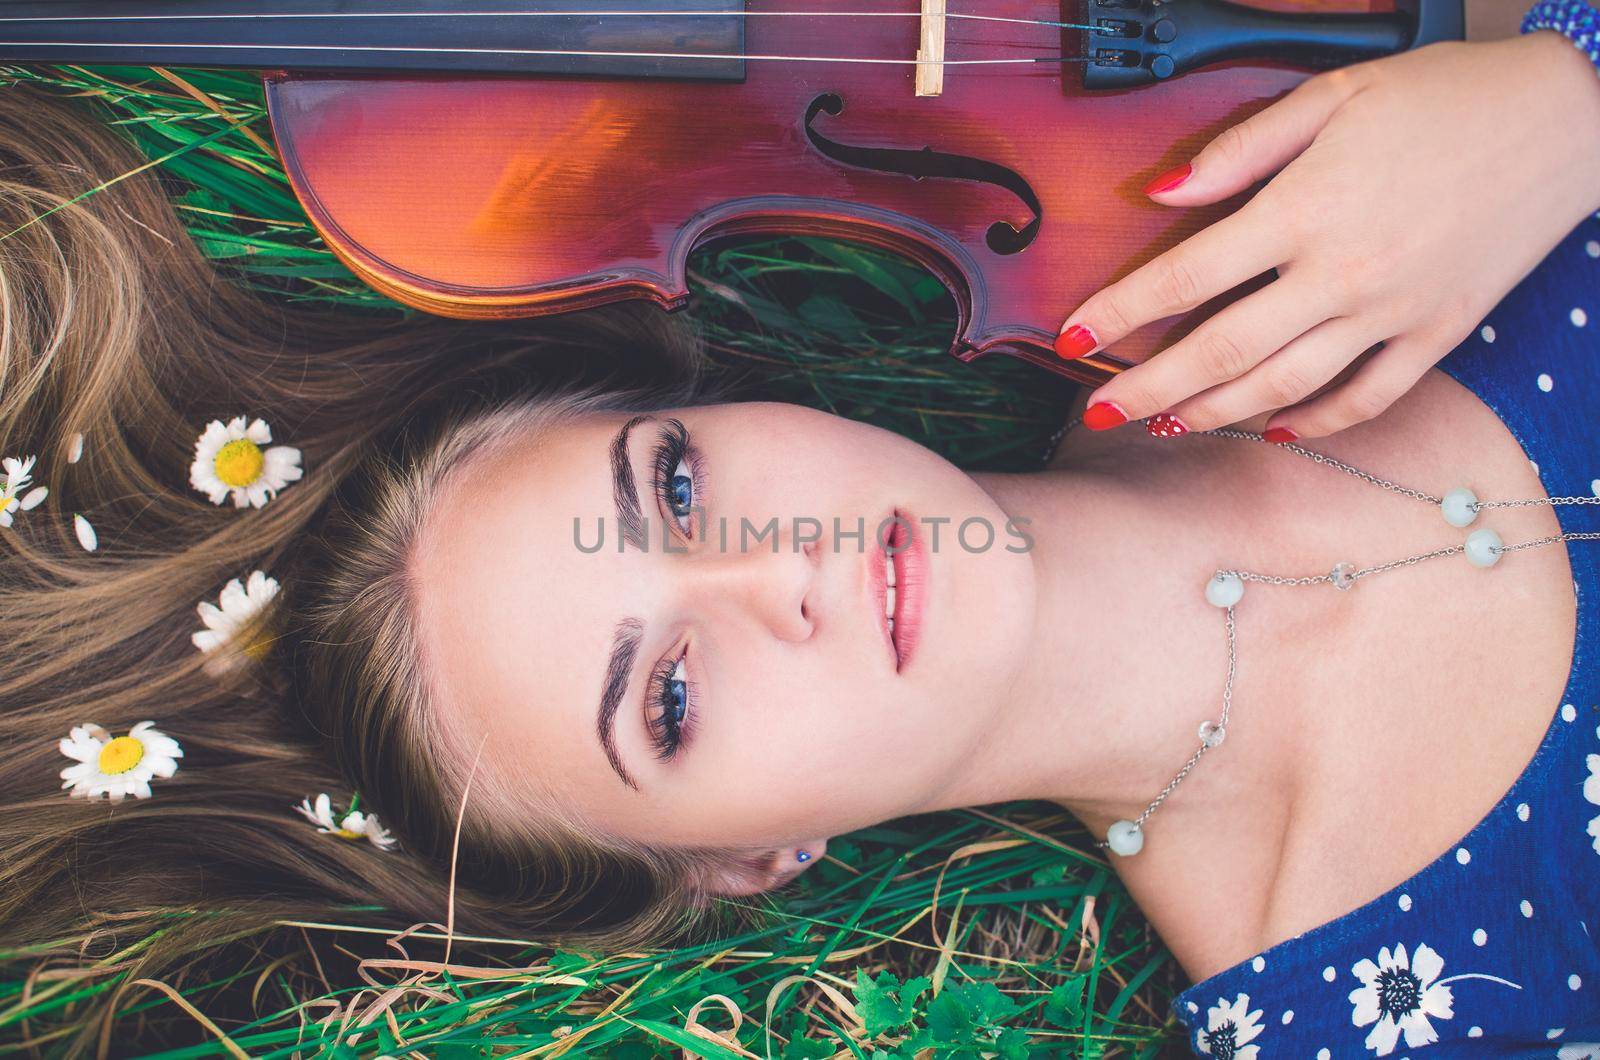 young slim fair-skinned girl blonde beautiful lies in tall grass. Girl in a blue short tight dress with a print of daisies. A bouquet and lonely daisies scattered around.A woman hugs violin. Top view